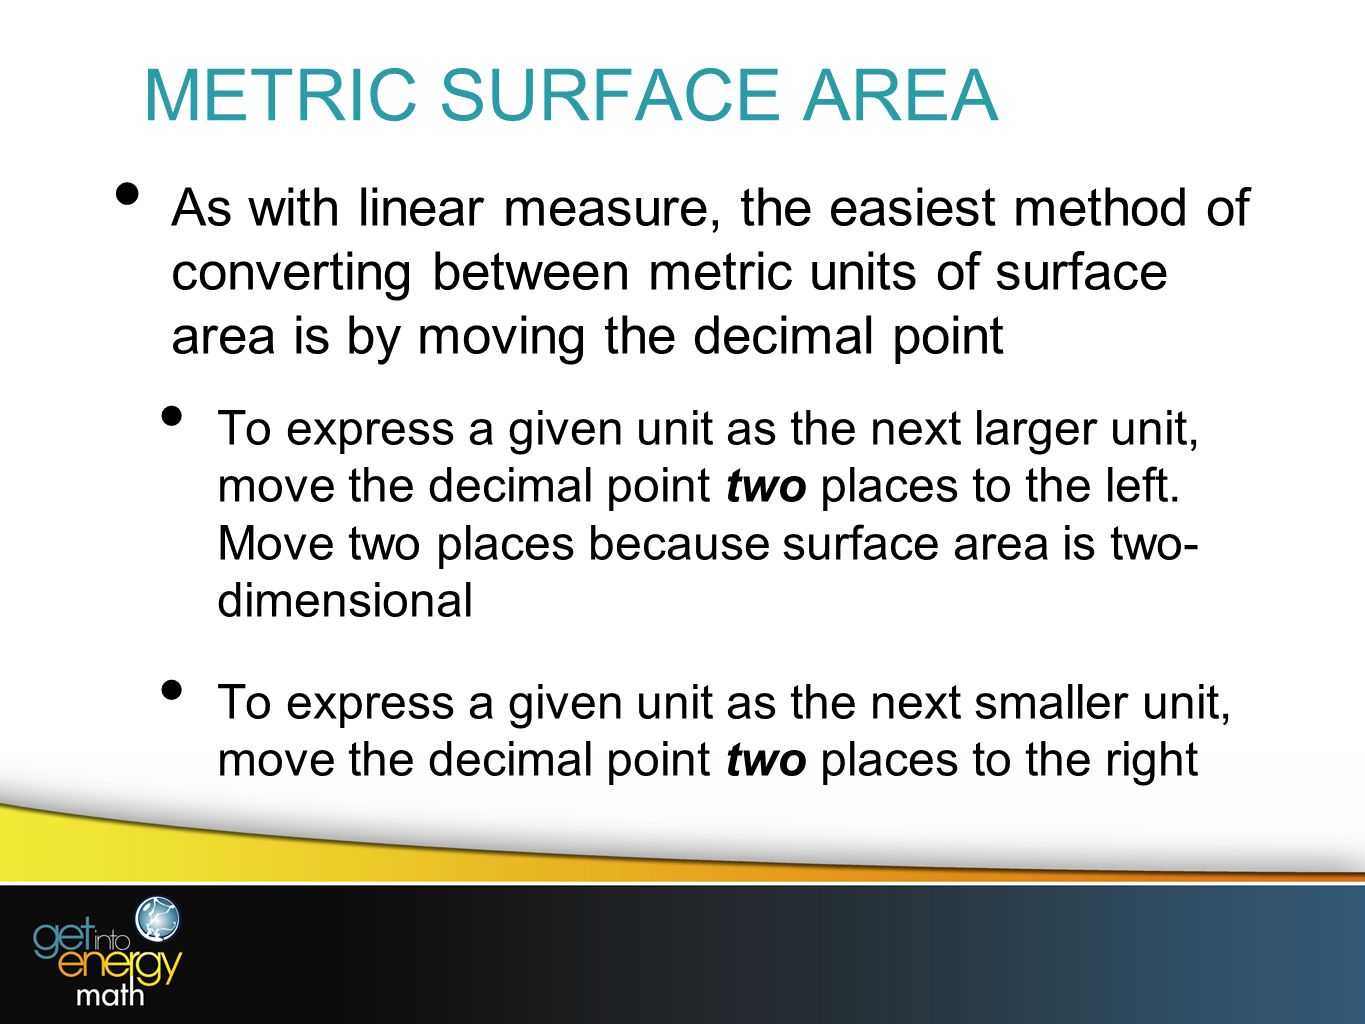 METRIC SURFACE AREA As with linear measure, the easiest method of converting between metric units of surface area is by moving the decimal point.